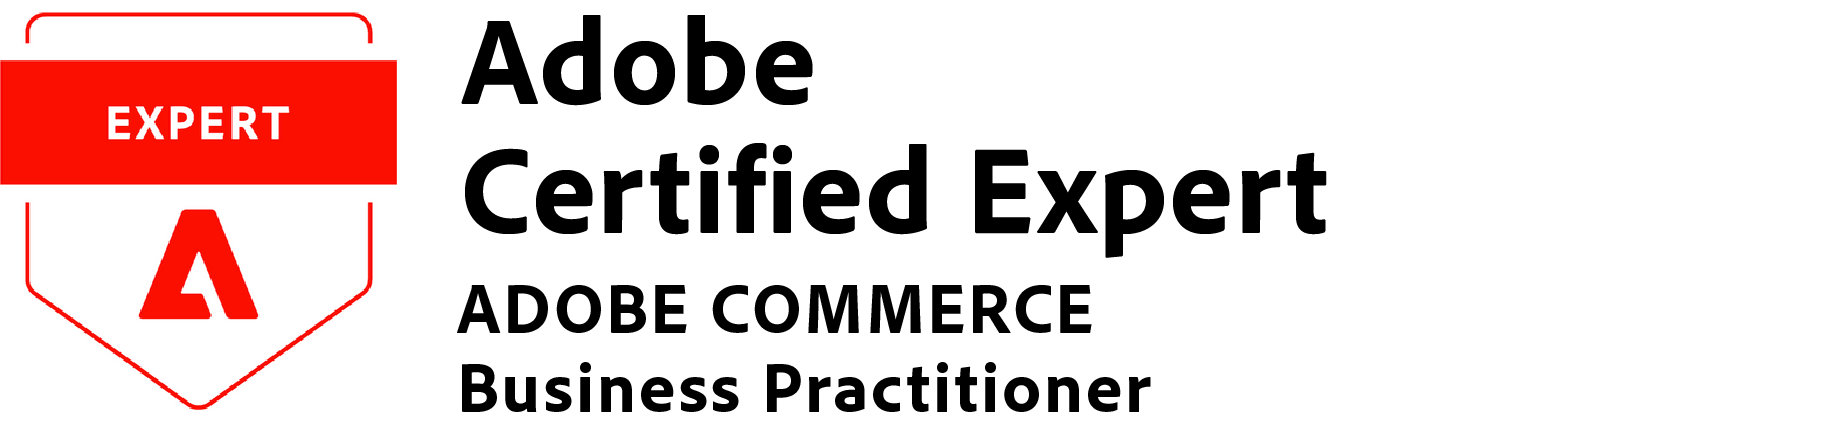 Adobe Certified Expert Adobe Commerce Business Practitioner